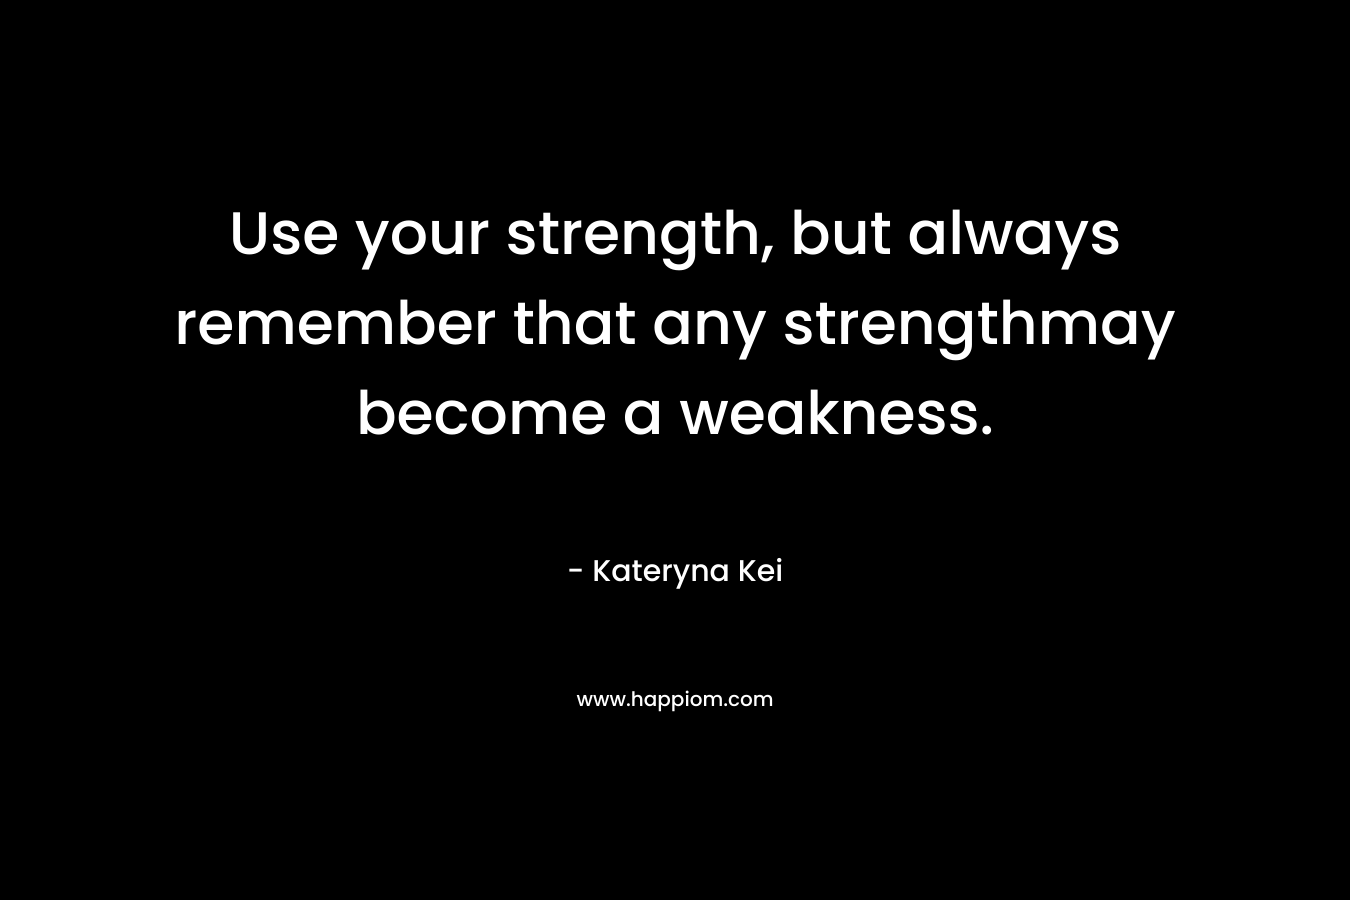 Use your strength, but always remember that any strengthmay become a weakness.